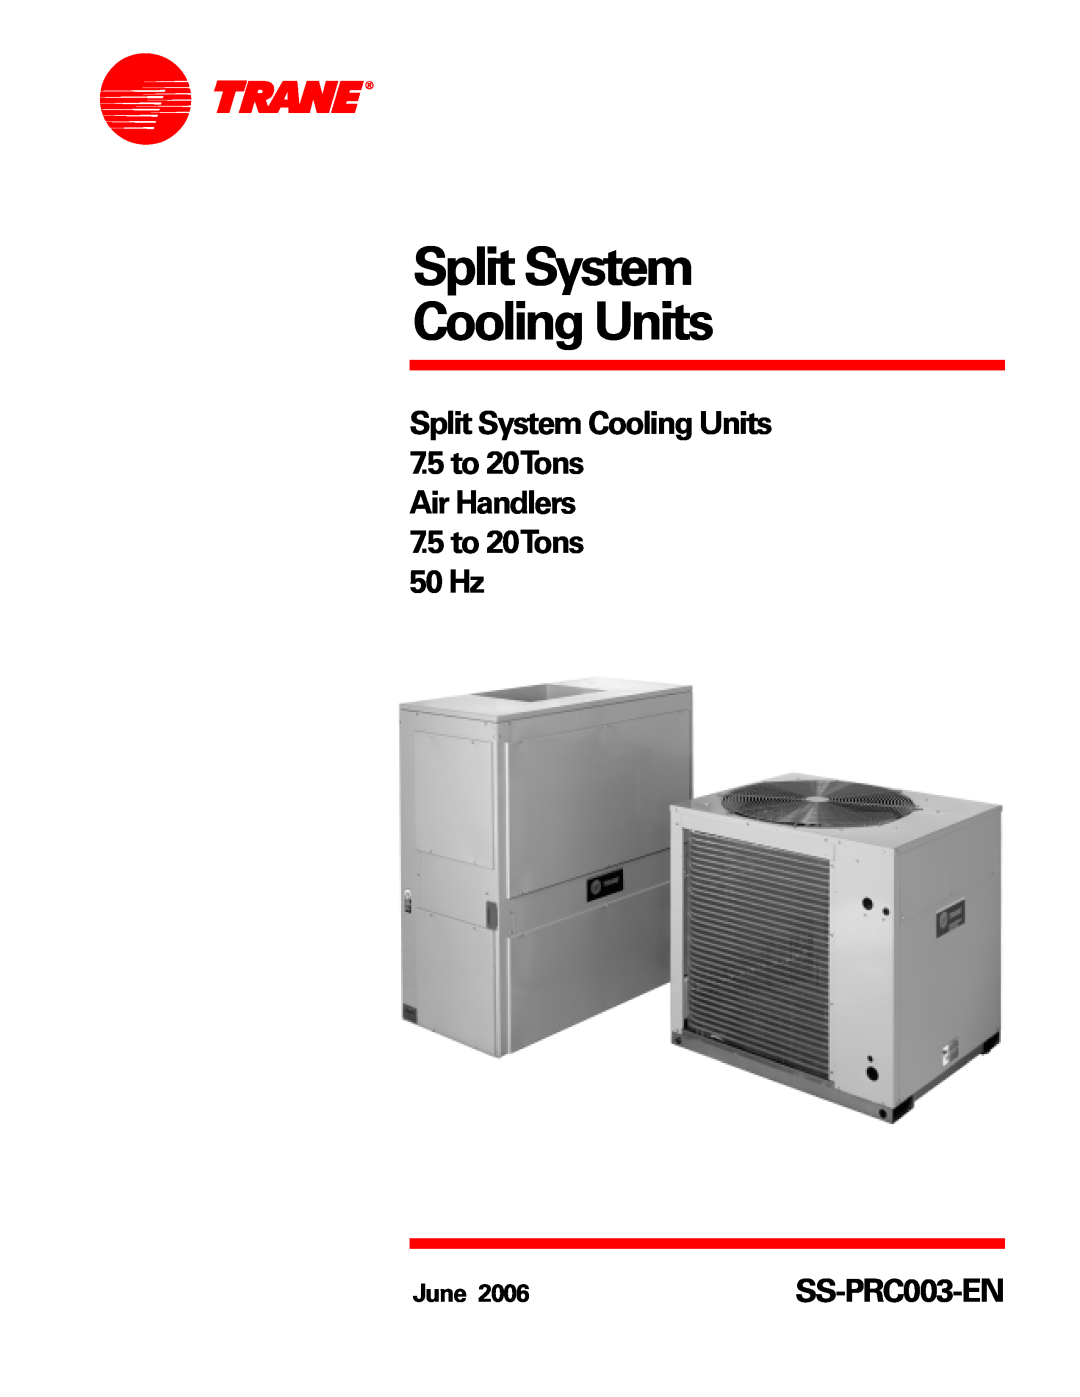 Trane SS-PRC003-EN manual Split System Cooling Units, 7.5to 20Tons 50 Hz, 7.5to 20Tons Air Handlers, June 